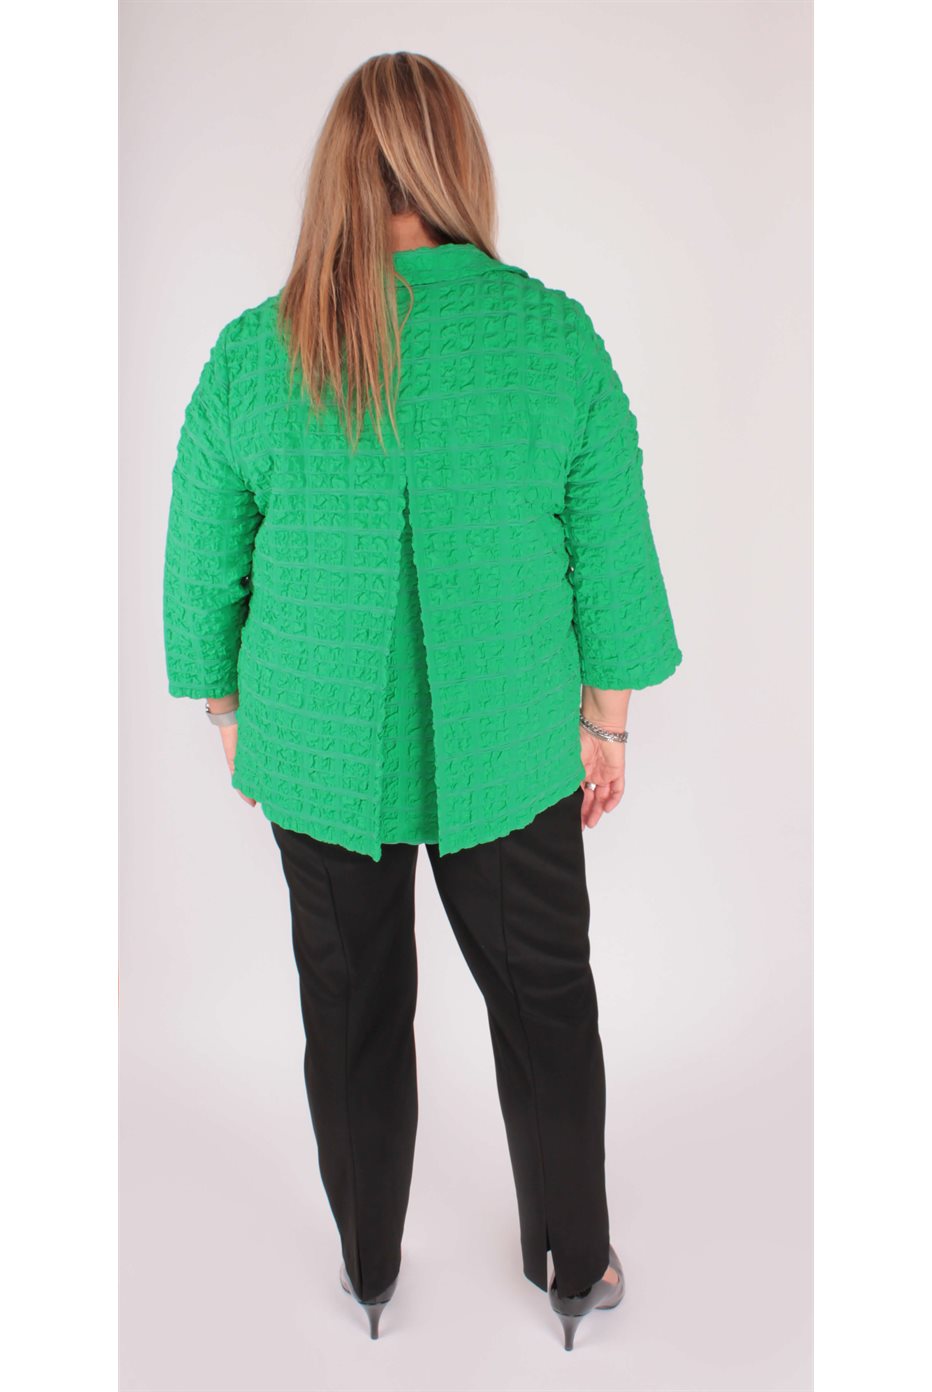 Green Textured and Checkered Jacket